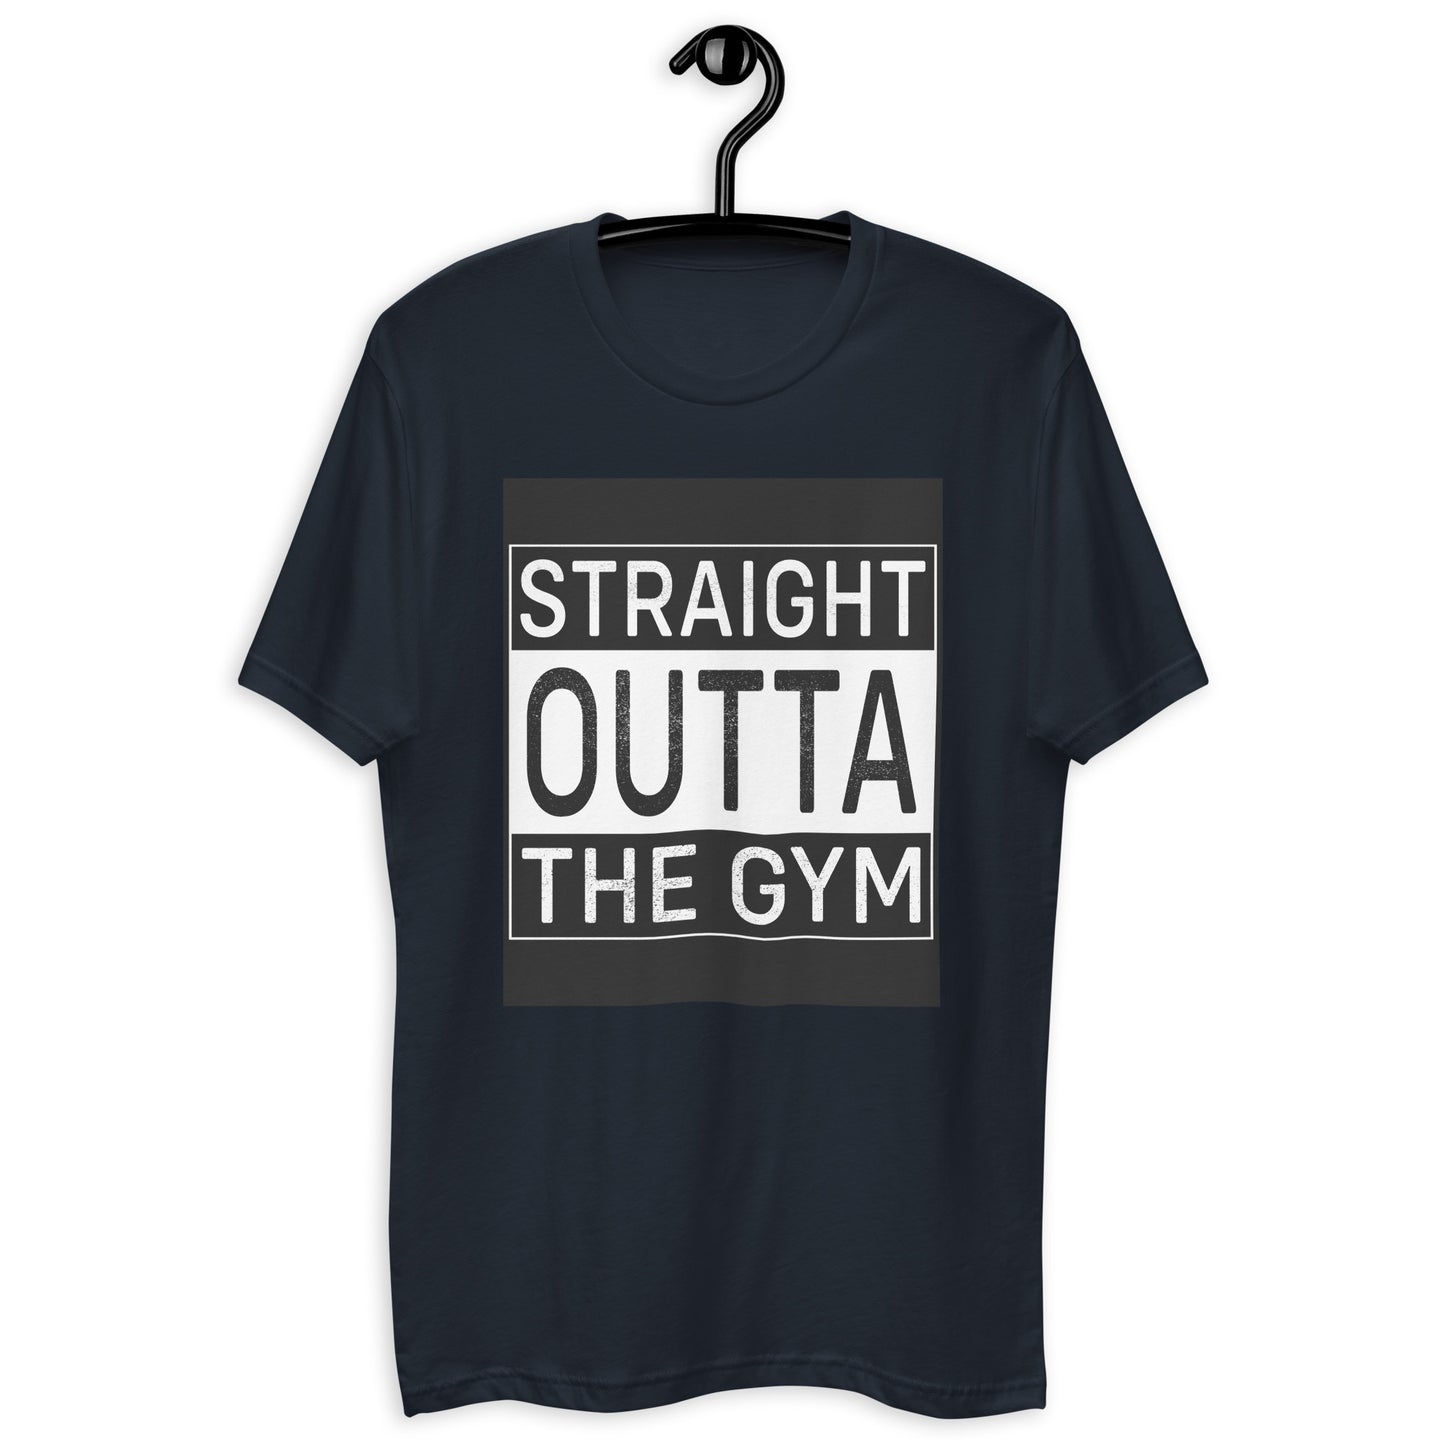 Sparkle-kiss-creations-straight-out-of-the-gym-t-shirt-dark-grey